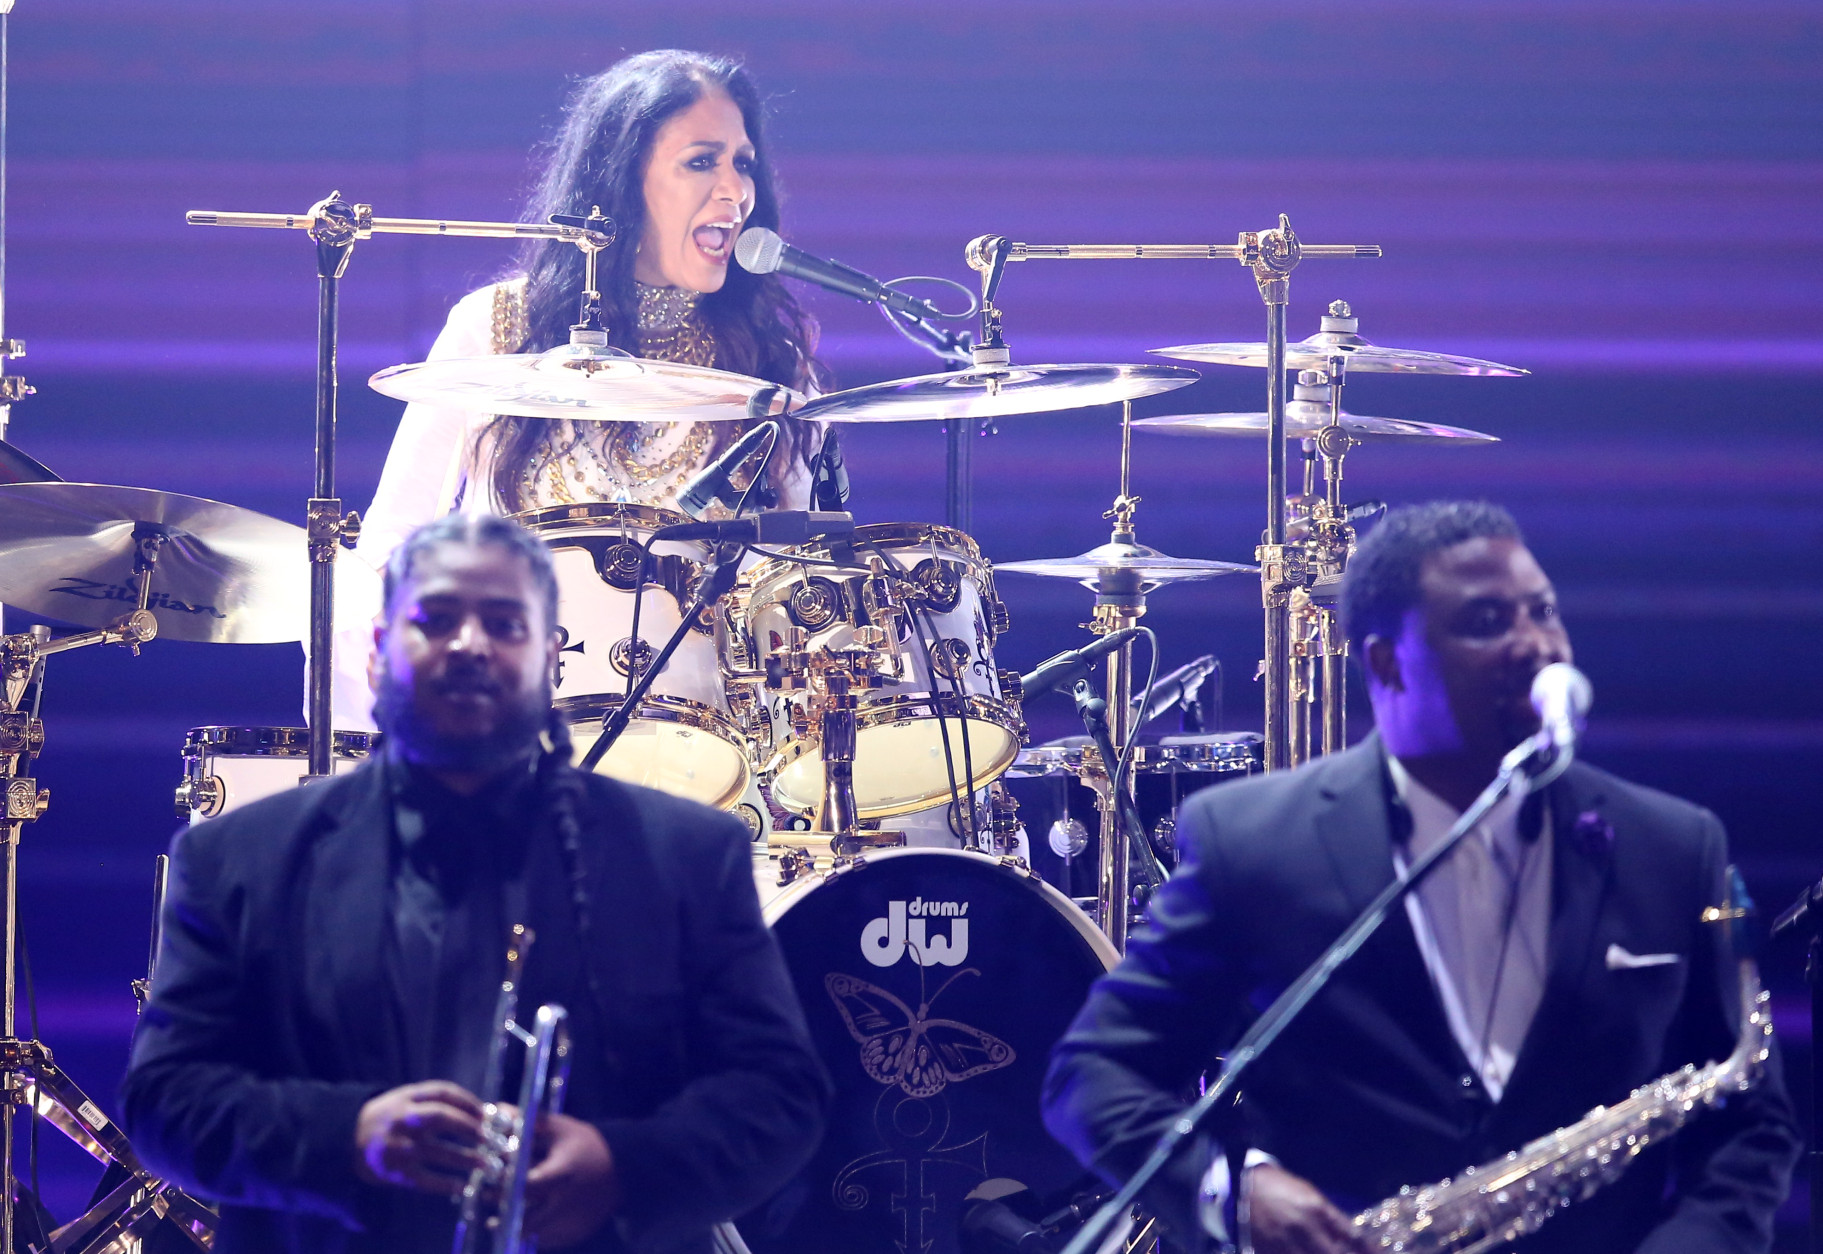 Sheila E. performs a tribute to Prince at the BET Awards at the Microsoft Theater on Sunday, June 26, 2016, in Los Angeles. (Photo by Matt Sayles/Invision/AP)